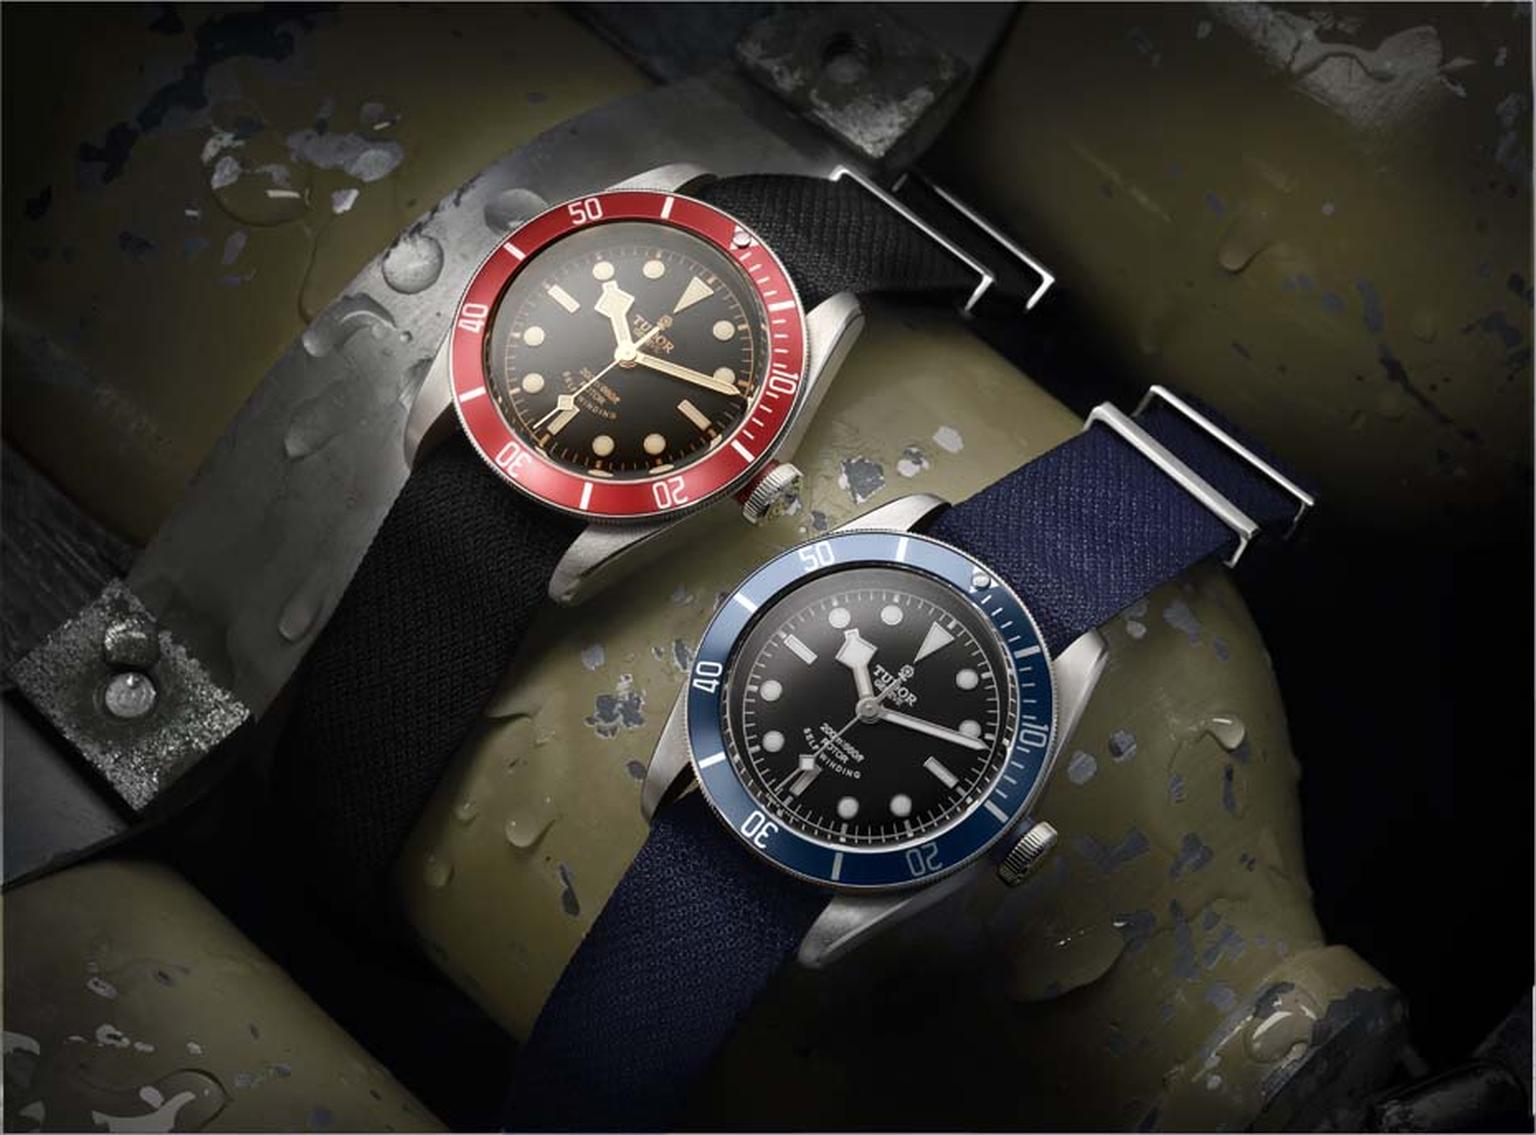 The new Tudor Heritage Black Bay divers watches are based on the design of a 1954 Submariner watch (£2,130).